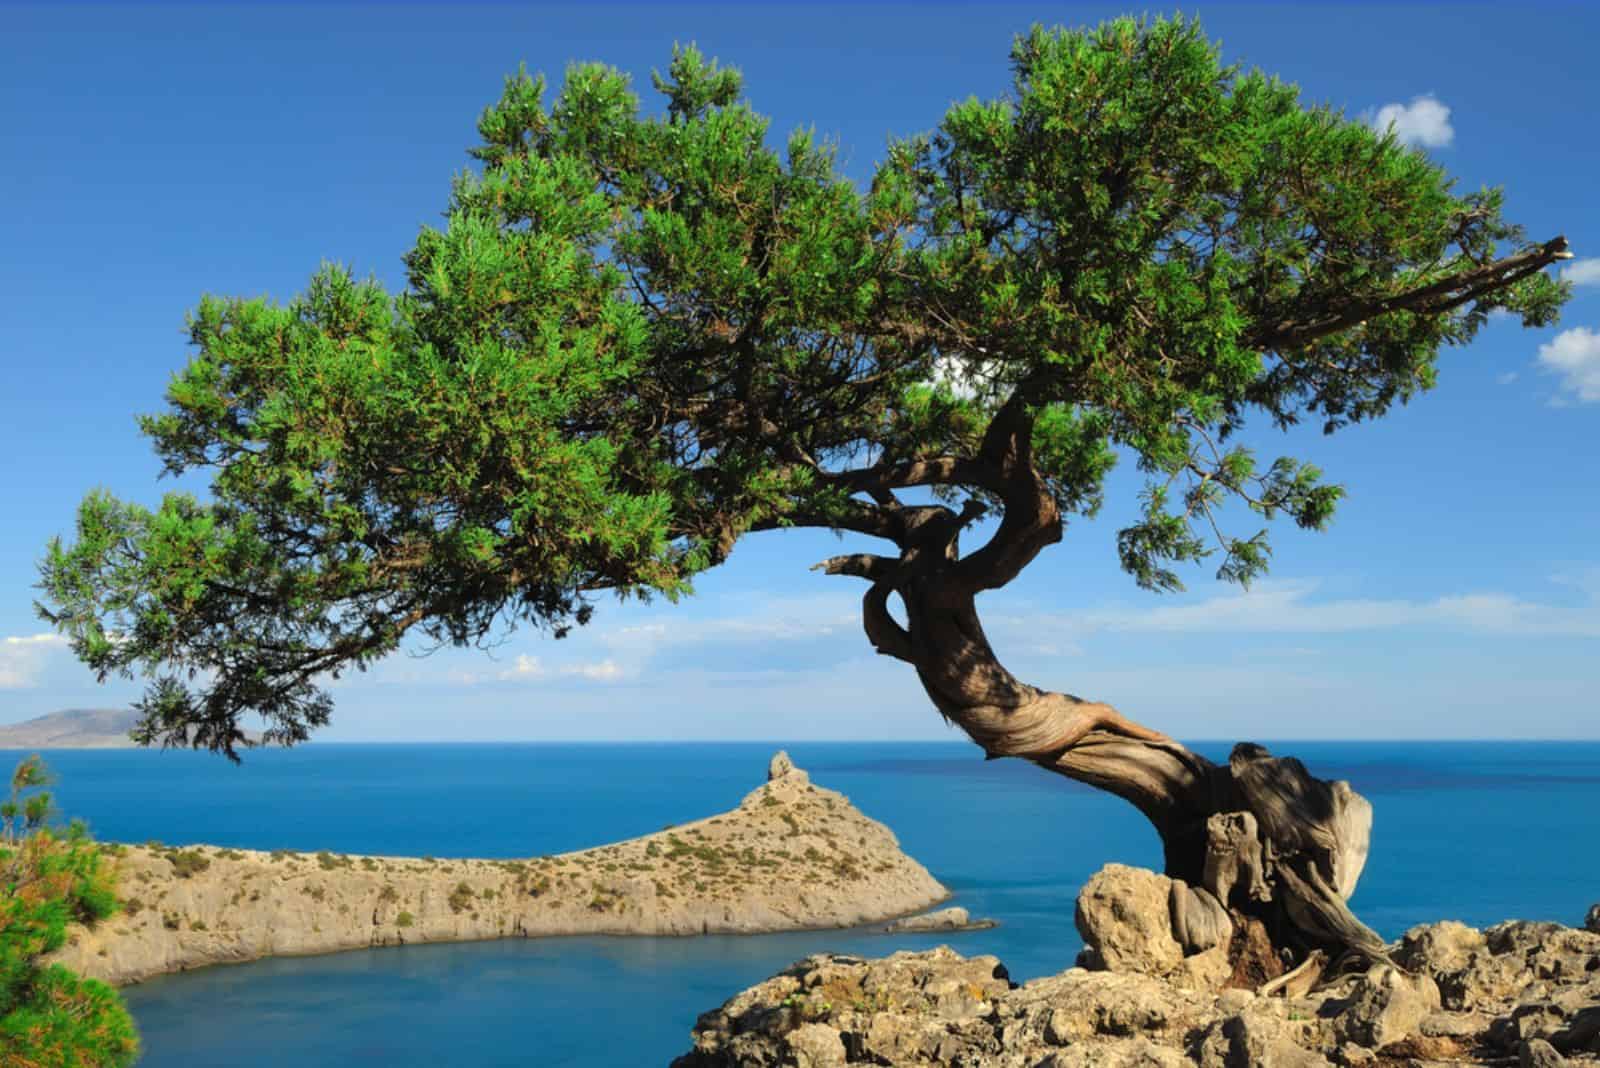 Lonely juniper on the brink of the rock over a blue bay